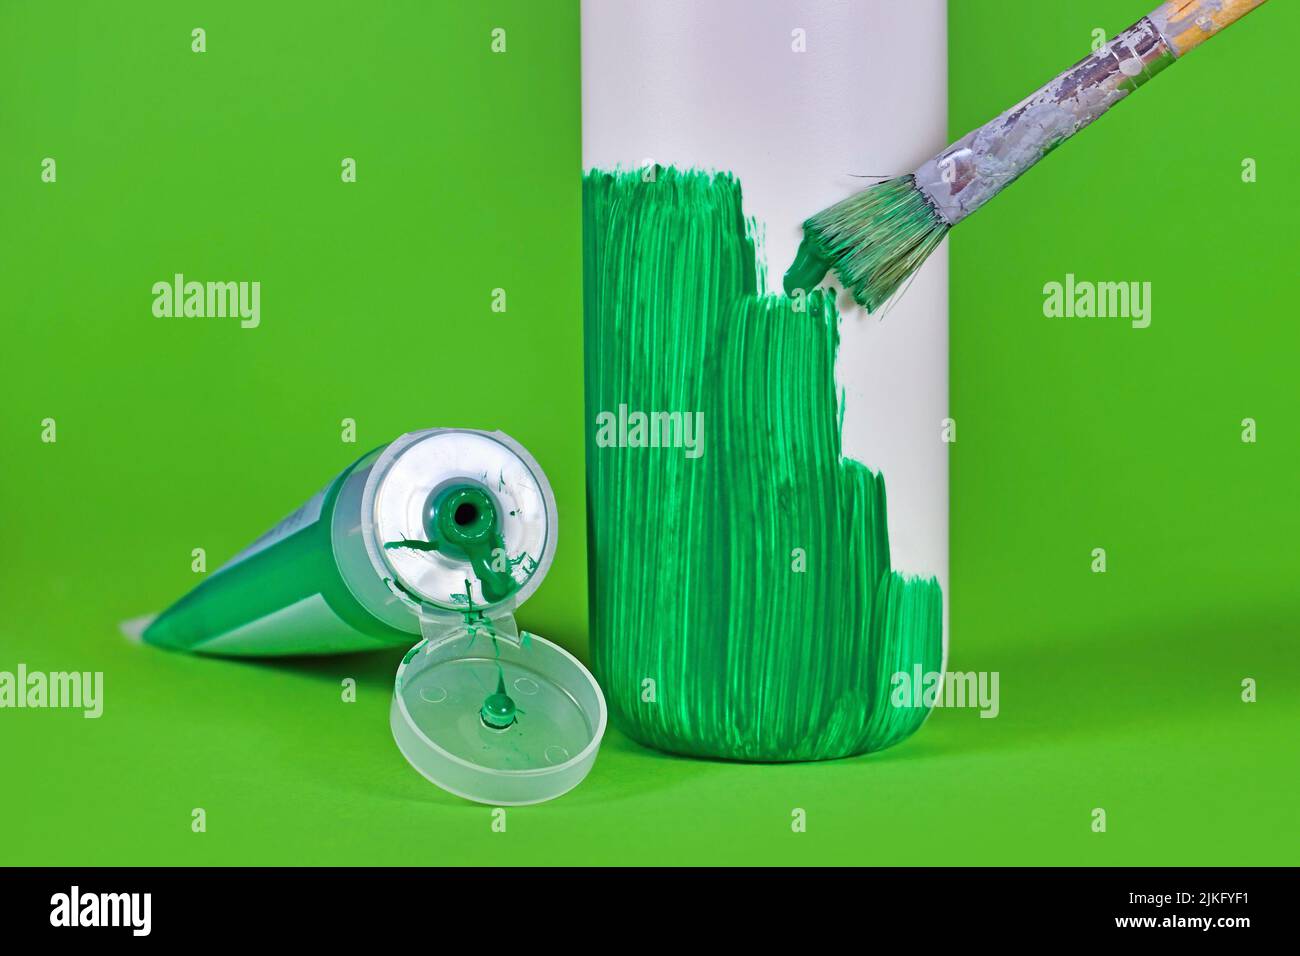 Concept for greenwashing with white plastic bottle being painted green Stock Photo